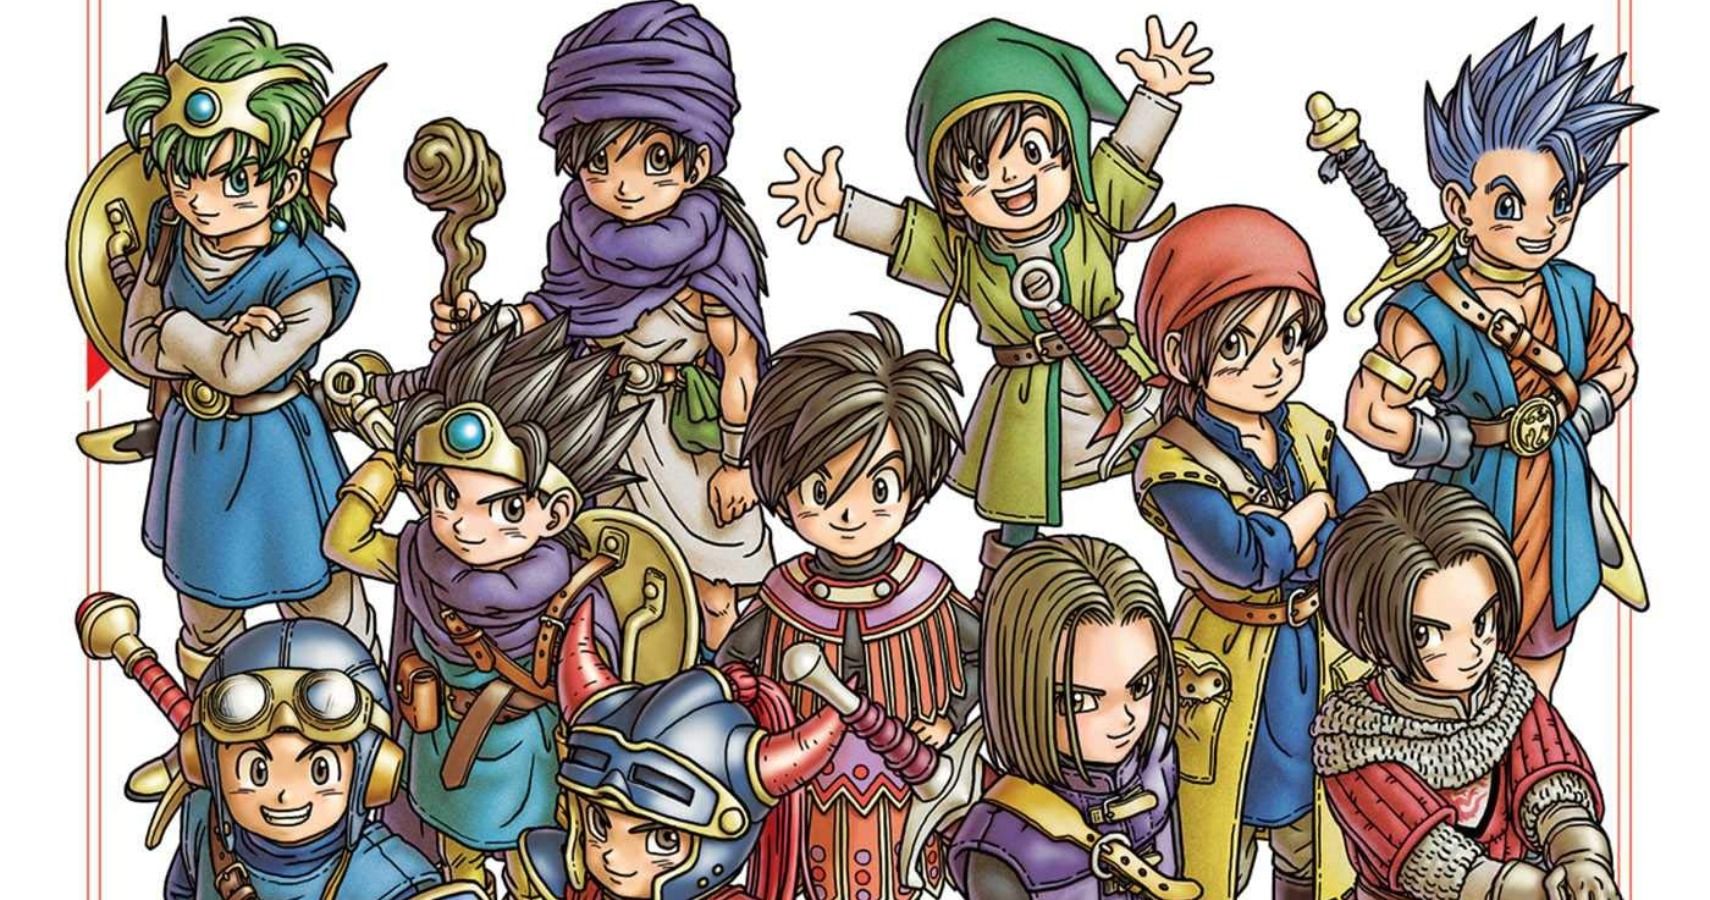 The Next Dragon Quest Game Will Be Coming To Smartphones